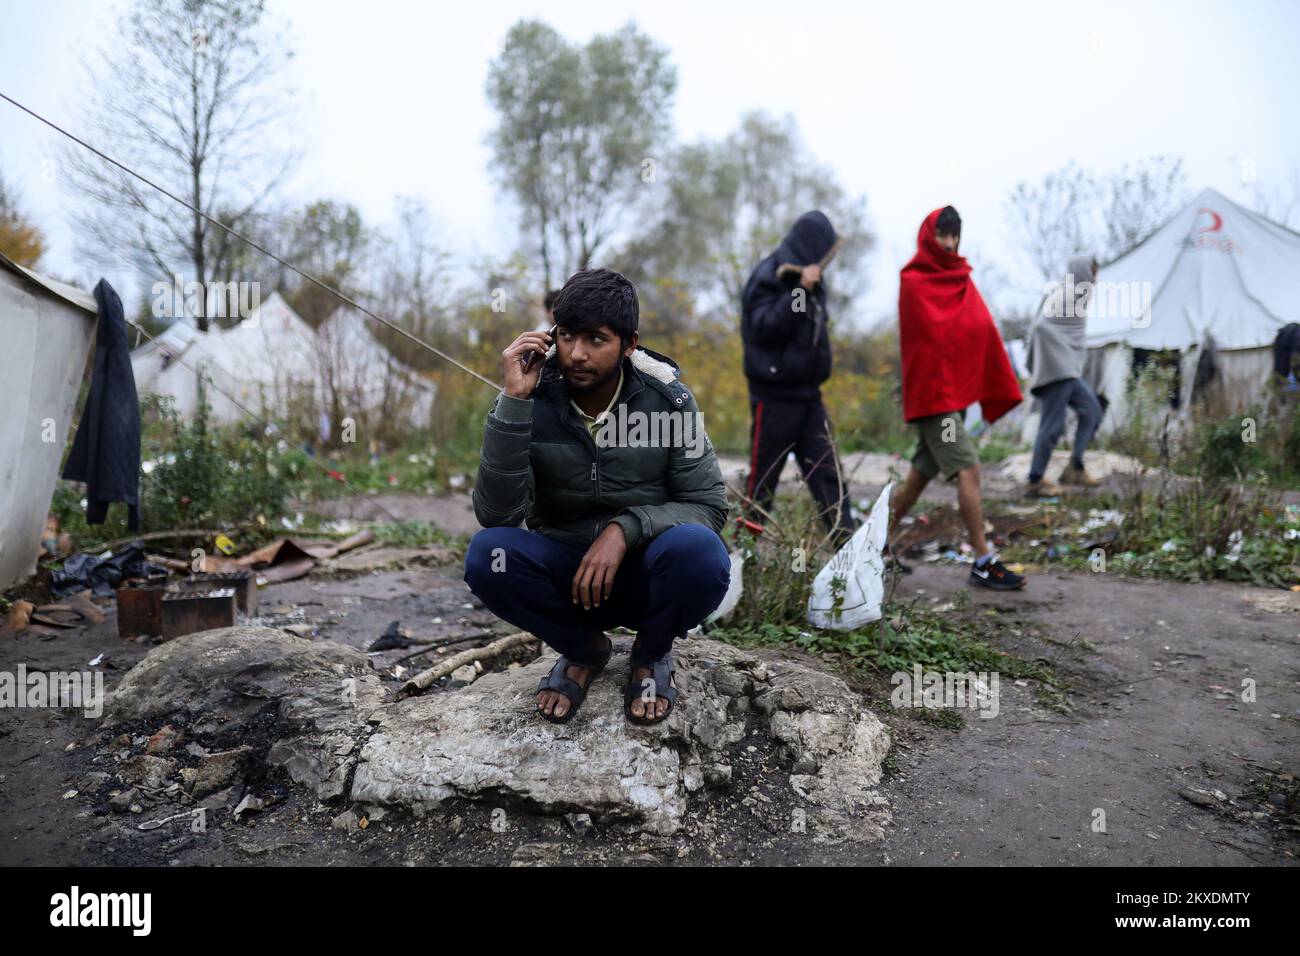 11.11.2019., Bihac, Bosnia and Herzegovina - There are between 1000 and 2000 migrants staying at the Vucjak camp near Bihac. That number varies because migrants go to the game daily, after which many return to camp beaten. The camp is located 8 km from the border. In the last few days temperatures have been moving around 0 degrees. The camp is located 8 km from the border with Croatia. Photo: Armin Durgut/PIXSELL Stock Photo